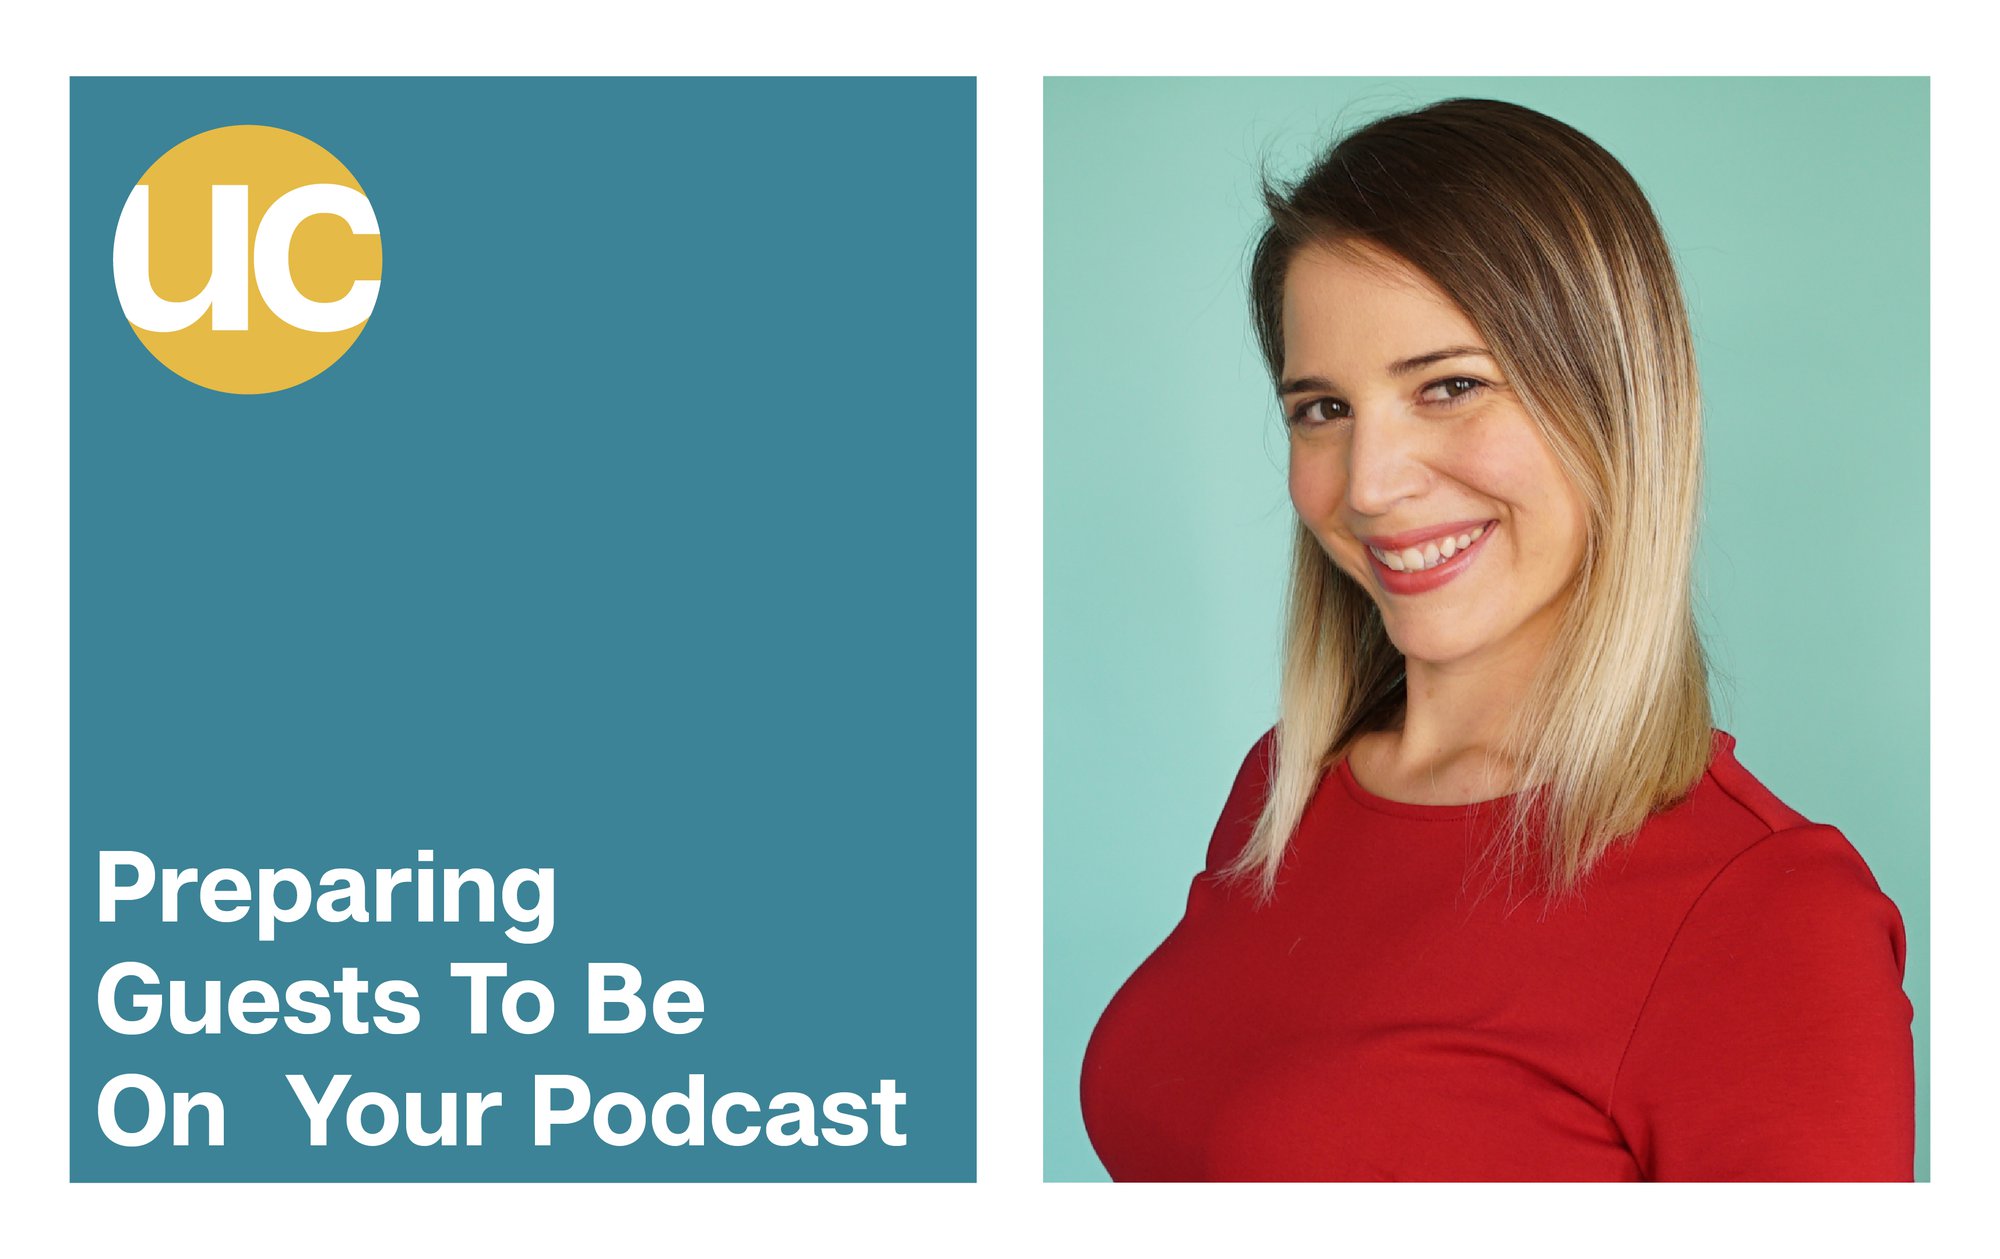 Preparing Guests To Be On Your Podcast